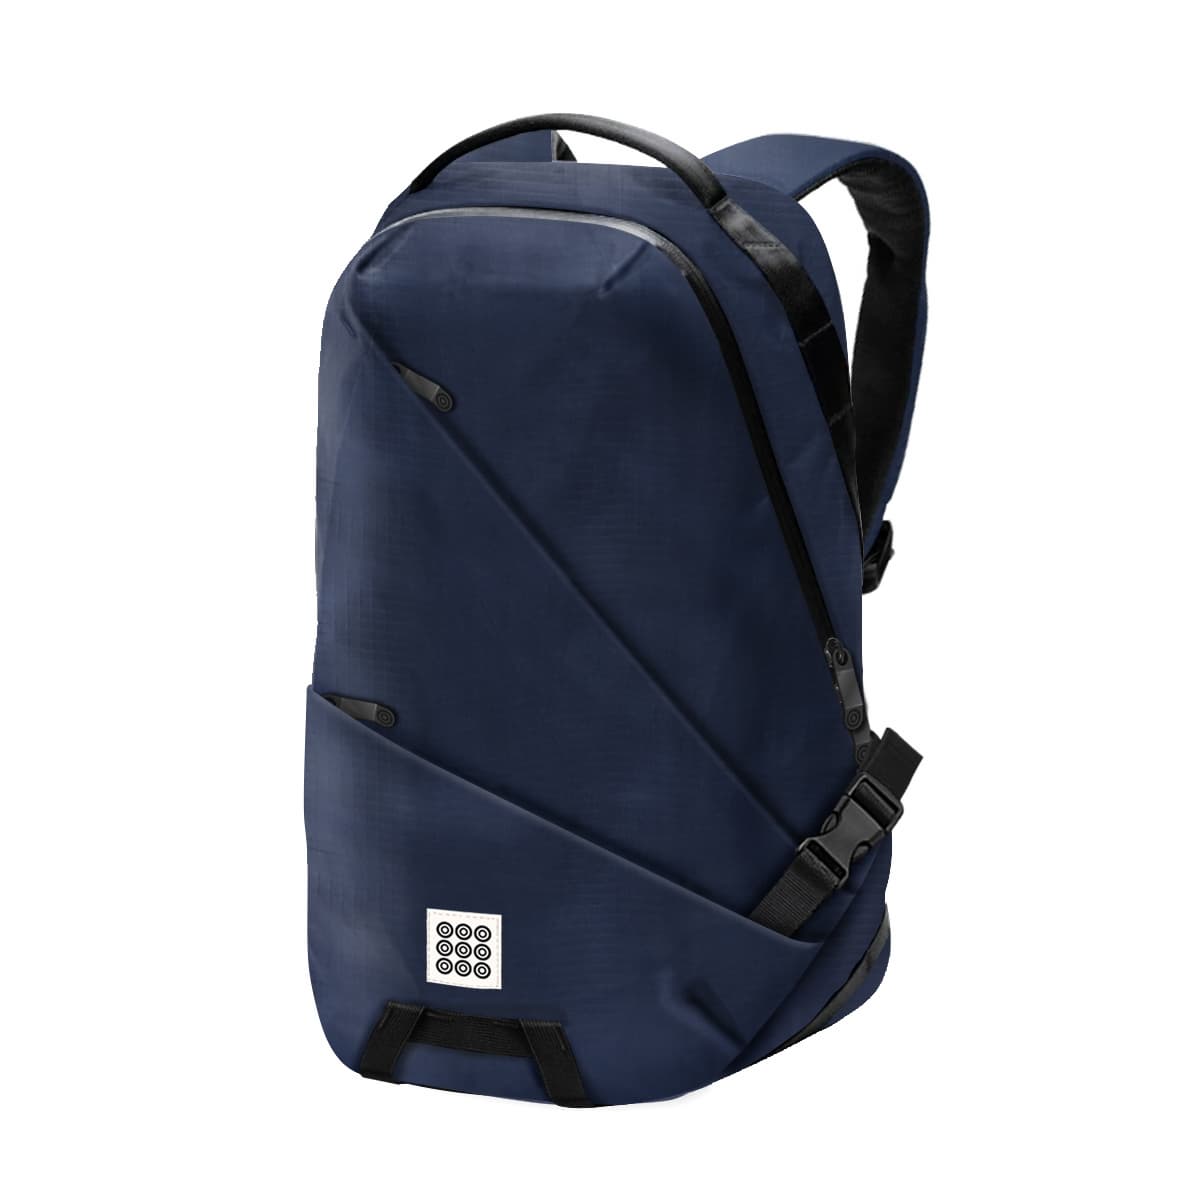 Onebody Laptop Backpack Bag_02 for Travel Business Casual